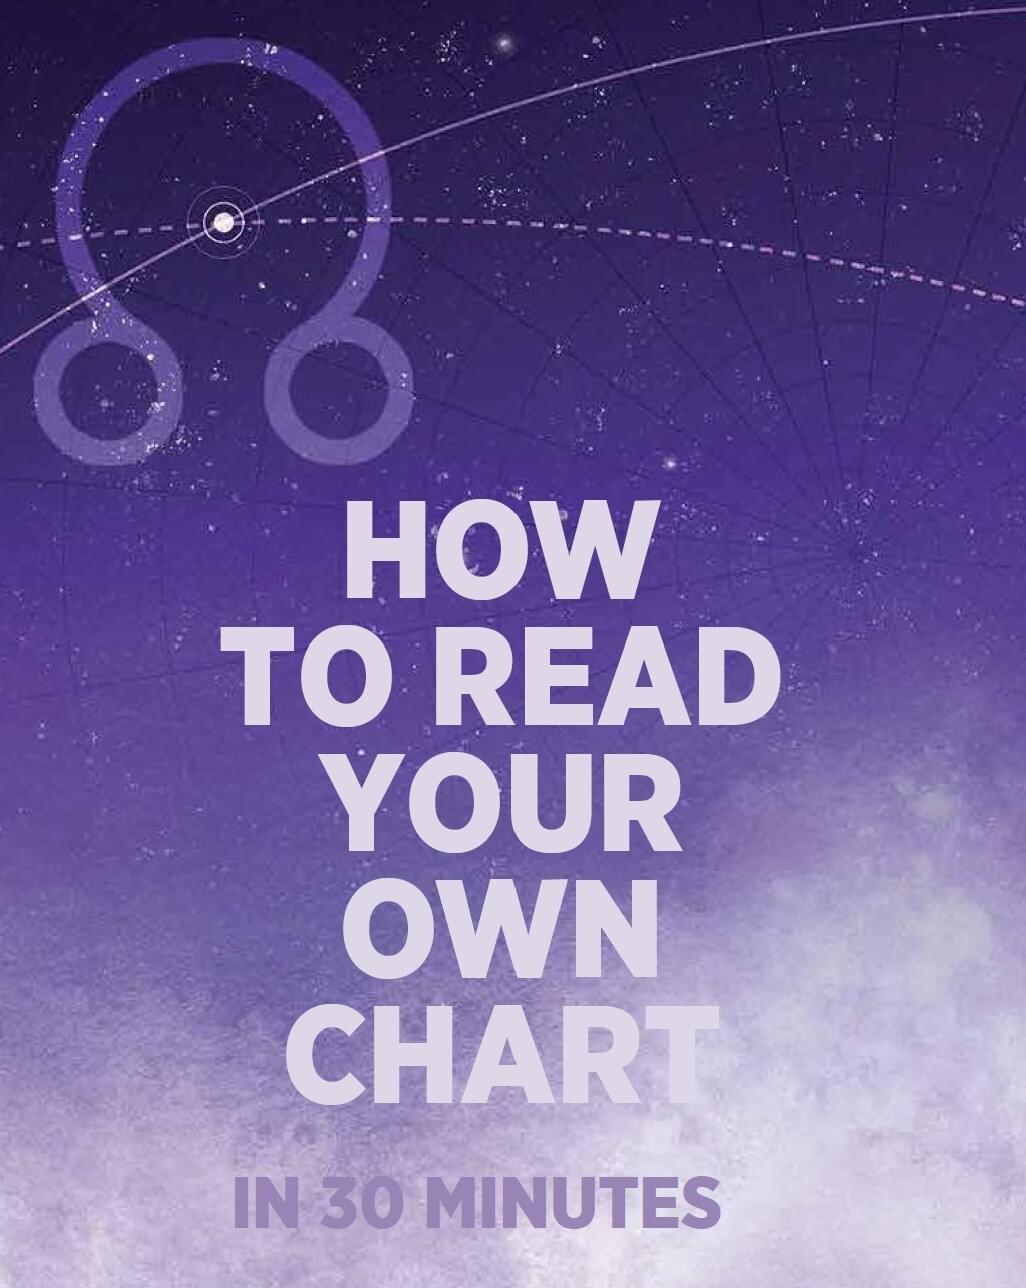 How to read your chart